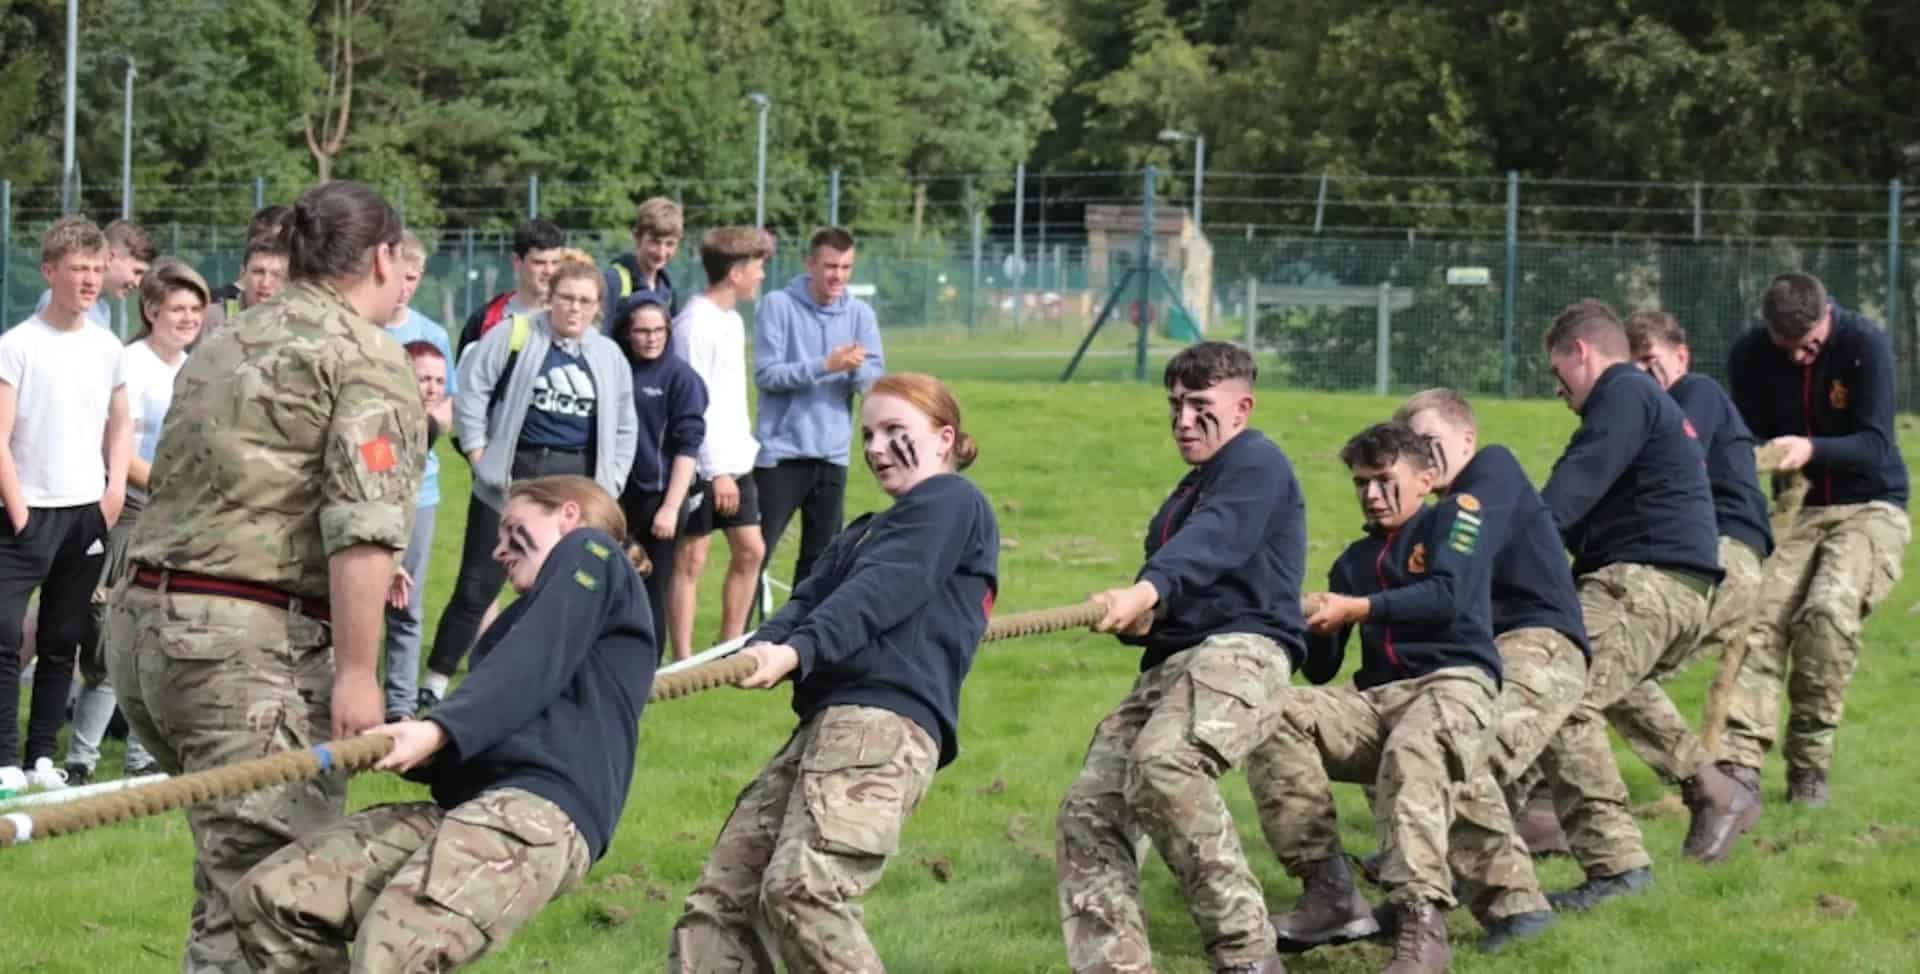 Army cadets in tug of war